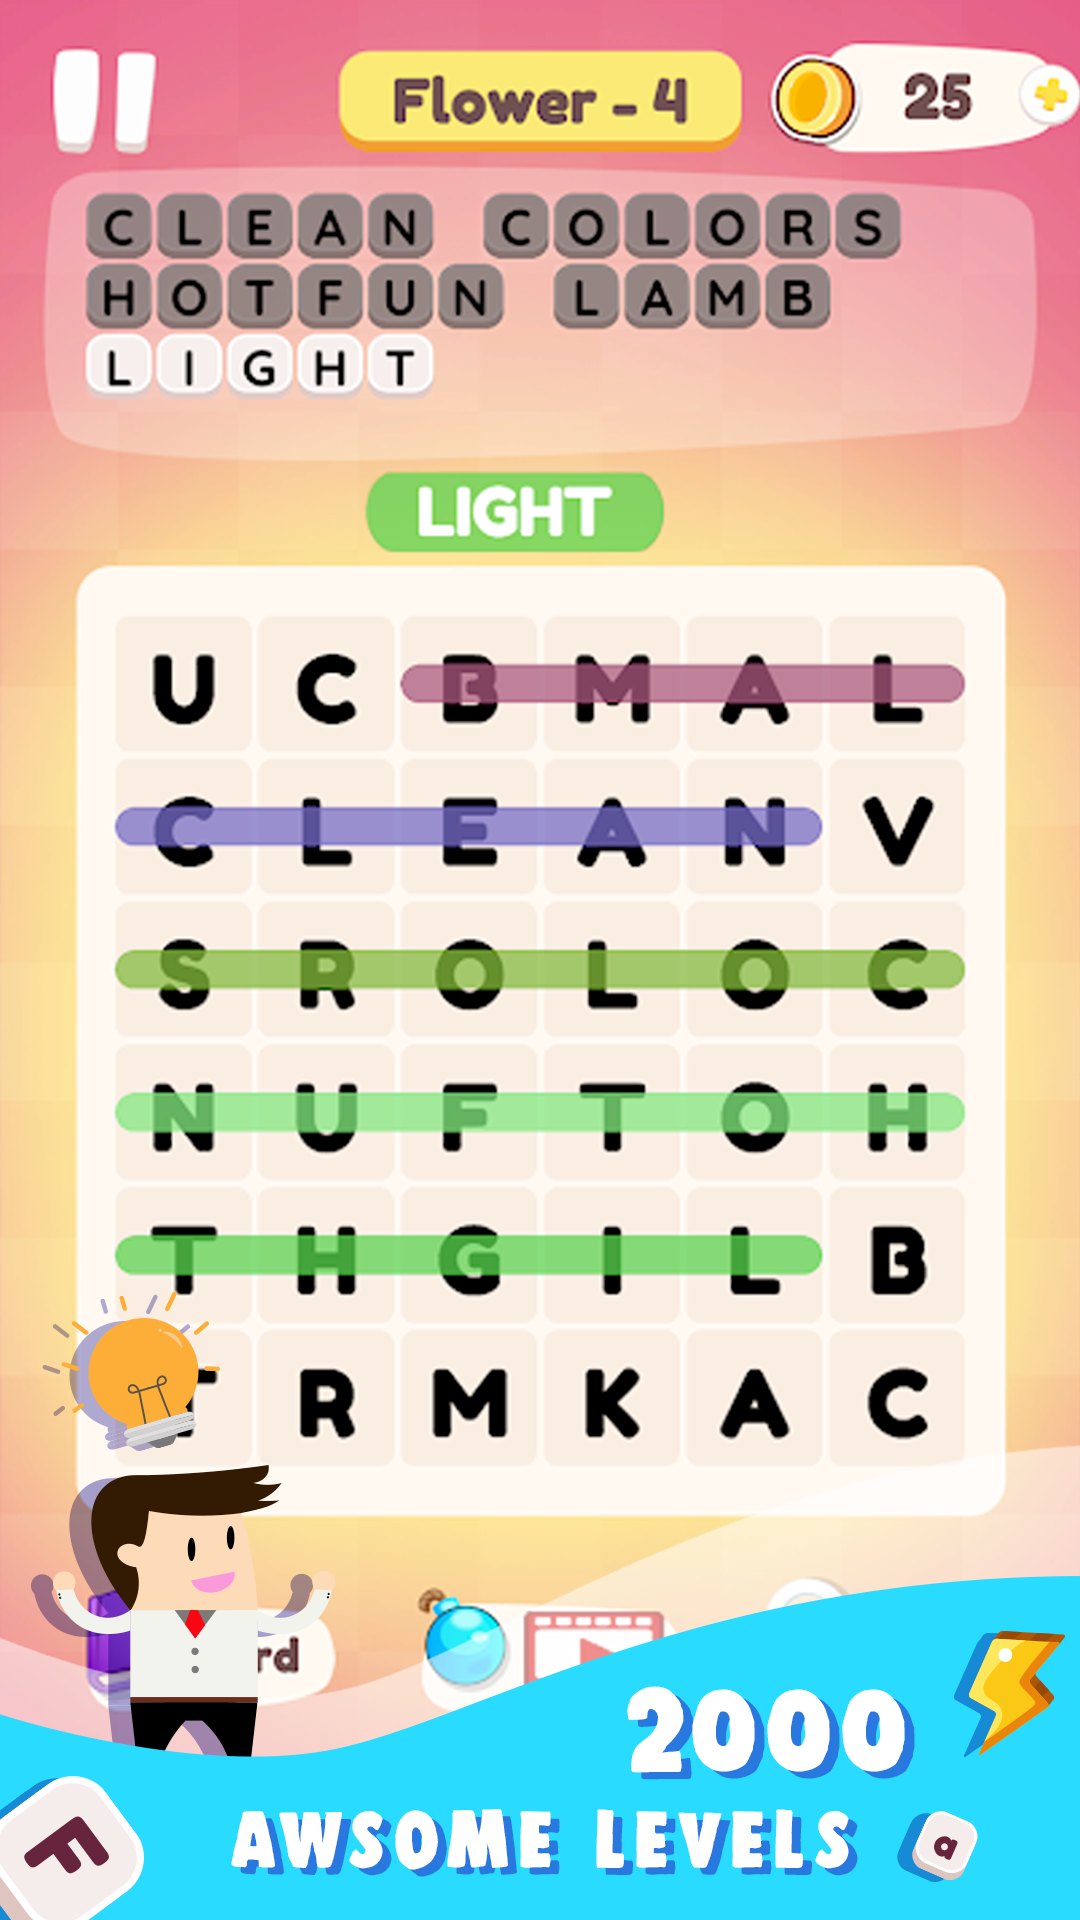 Word Search 2: Advance Hidden Words Puzzle screenshot game